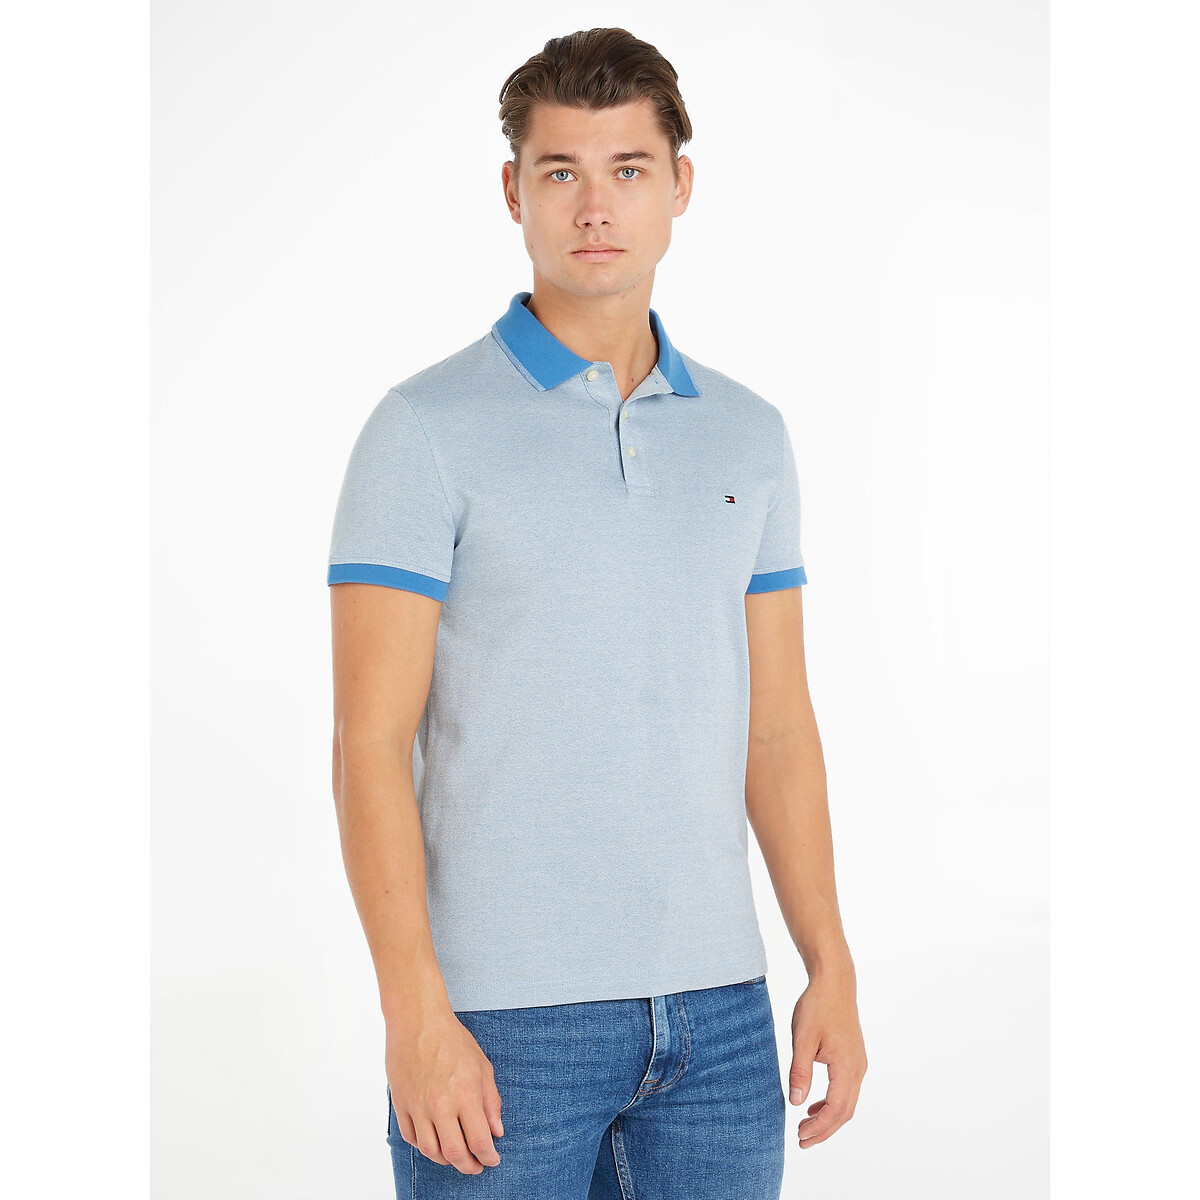 Embroidered Logo Polo Shirt in Cotton and Stranded Knit with Short Sleeves